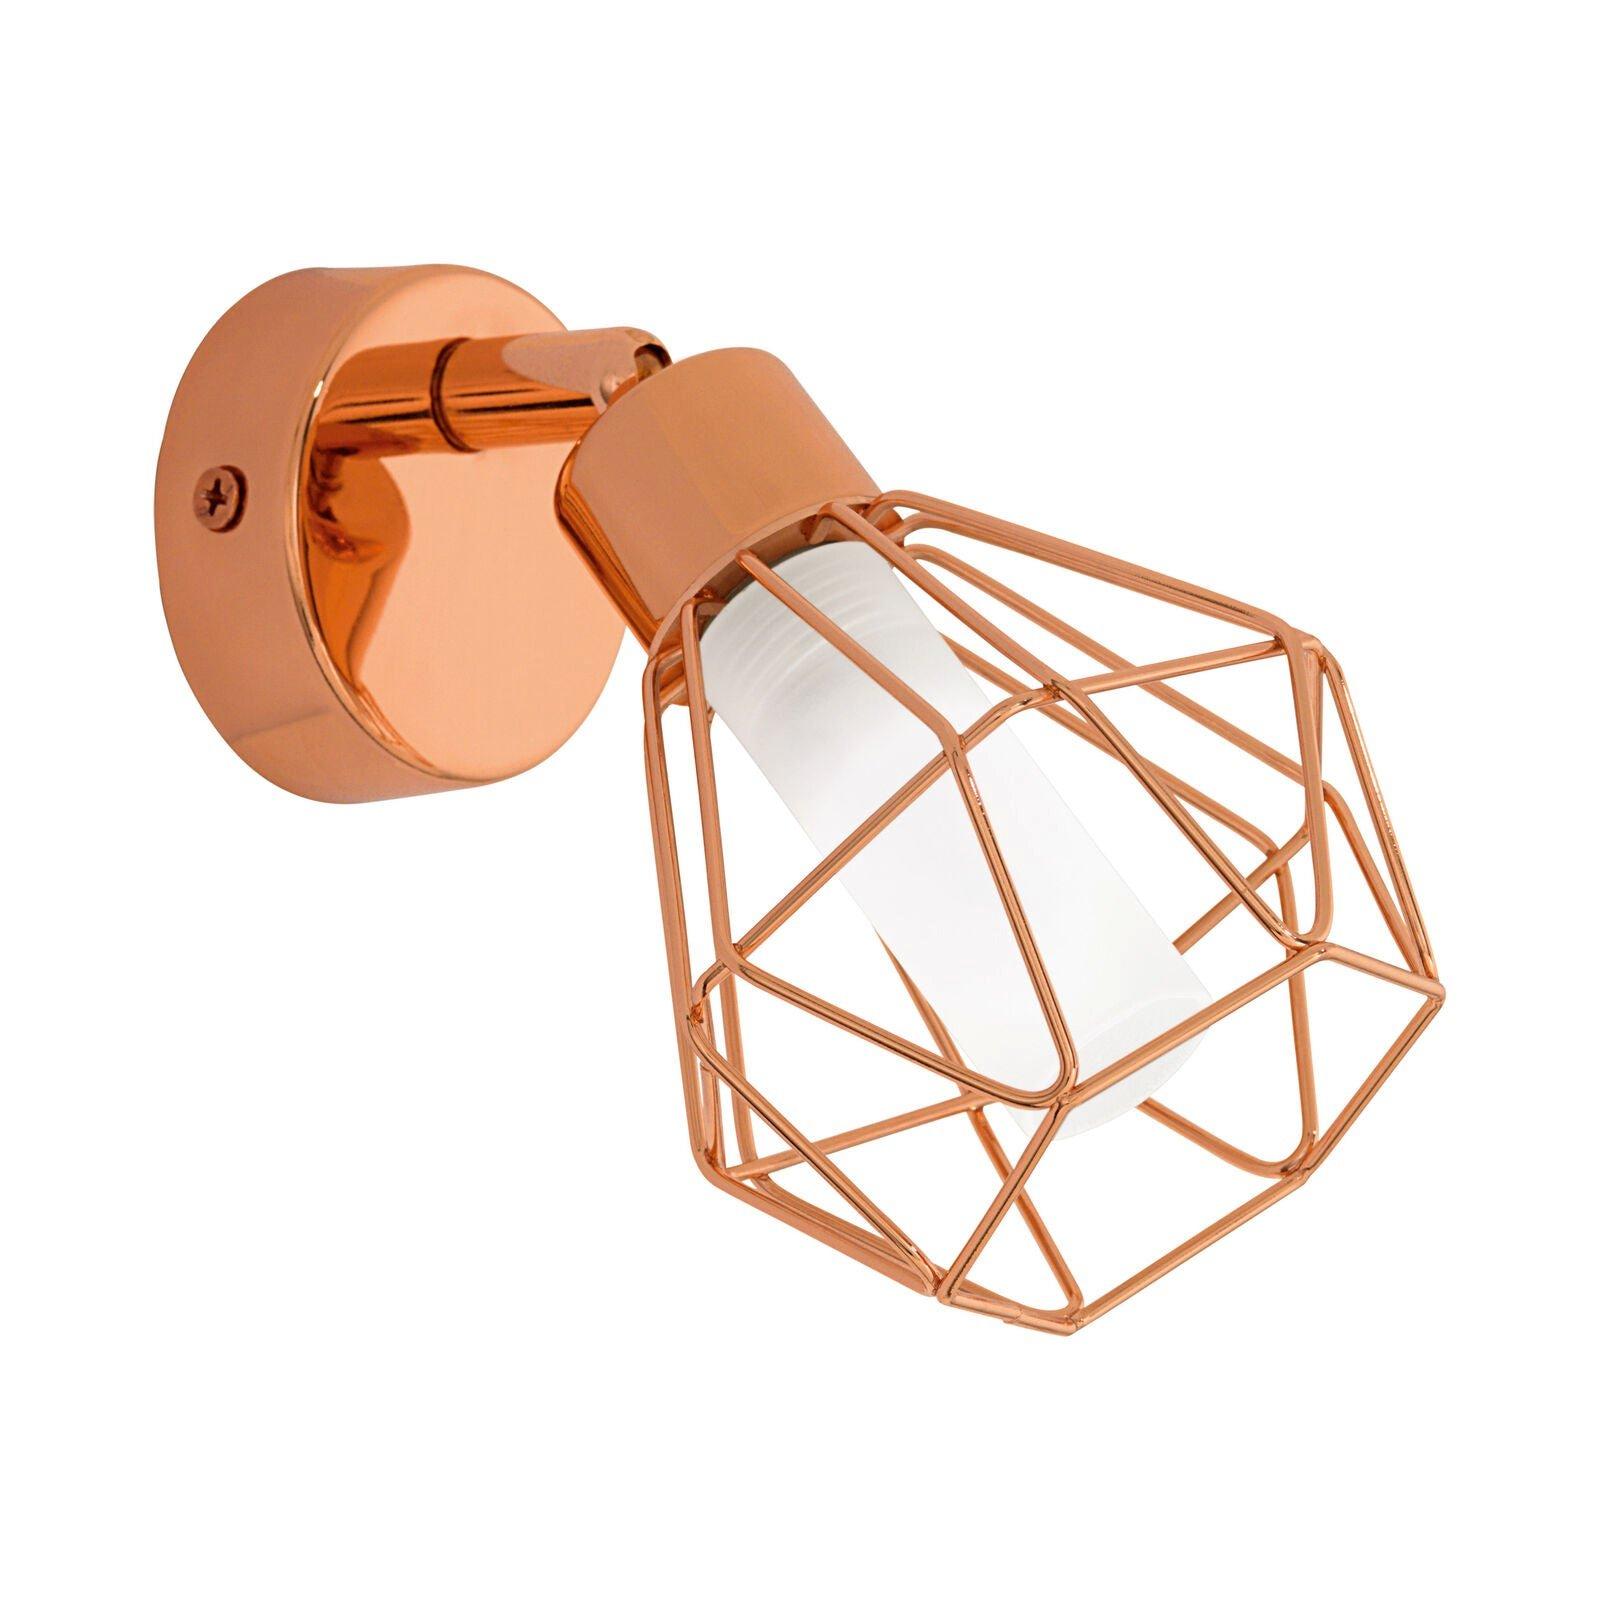 Wall 1 Spot Light Copper Steel Shade White Satin Glass Bulb G9 1x3W Included